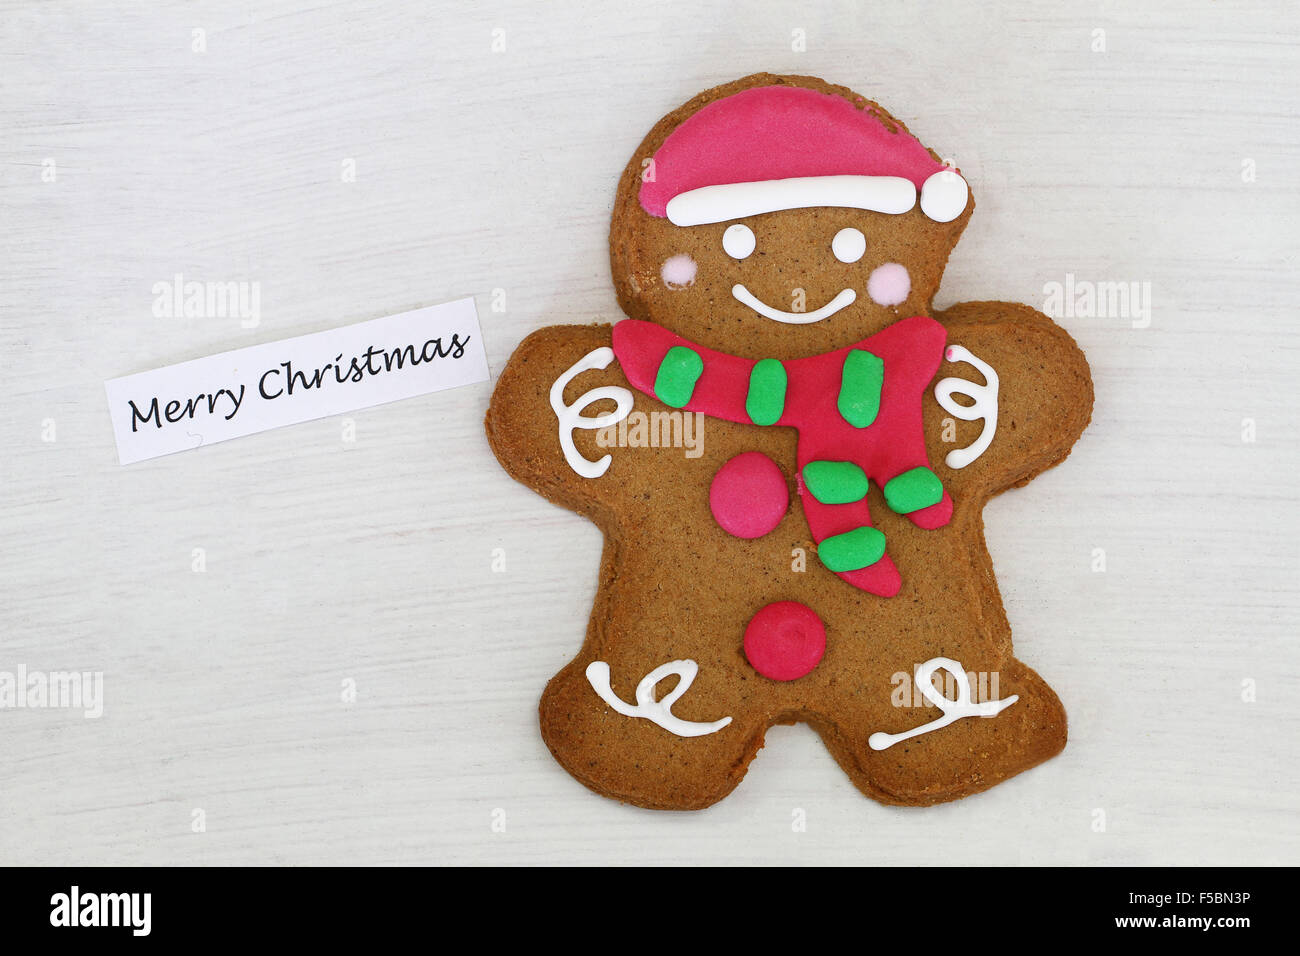 Merry Christmas card with gingerbread man on white wooden surface Stock Photo